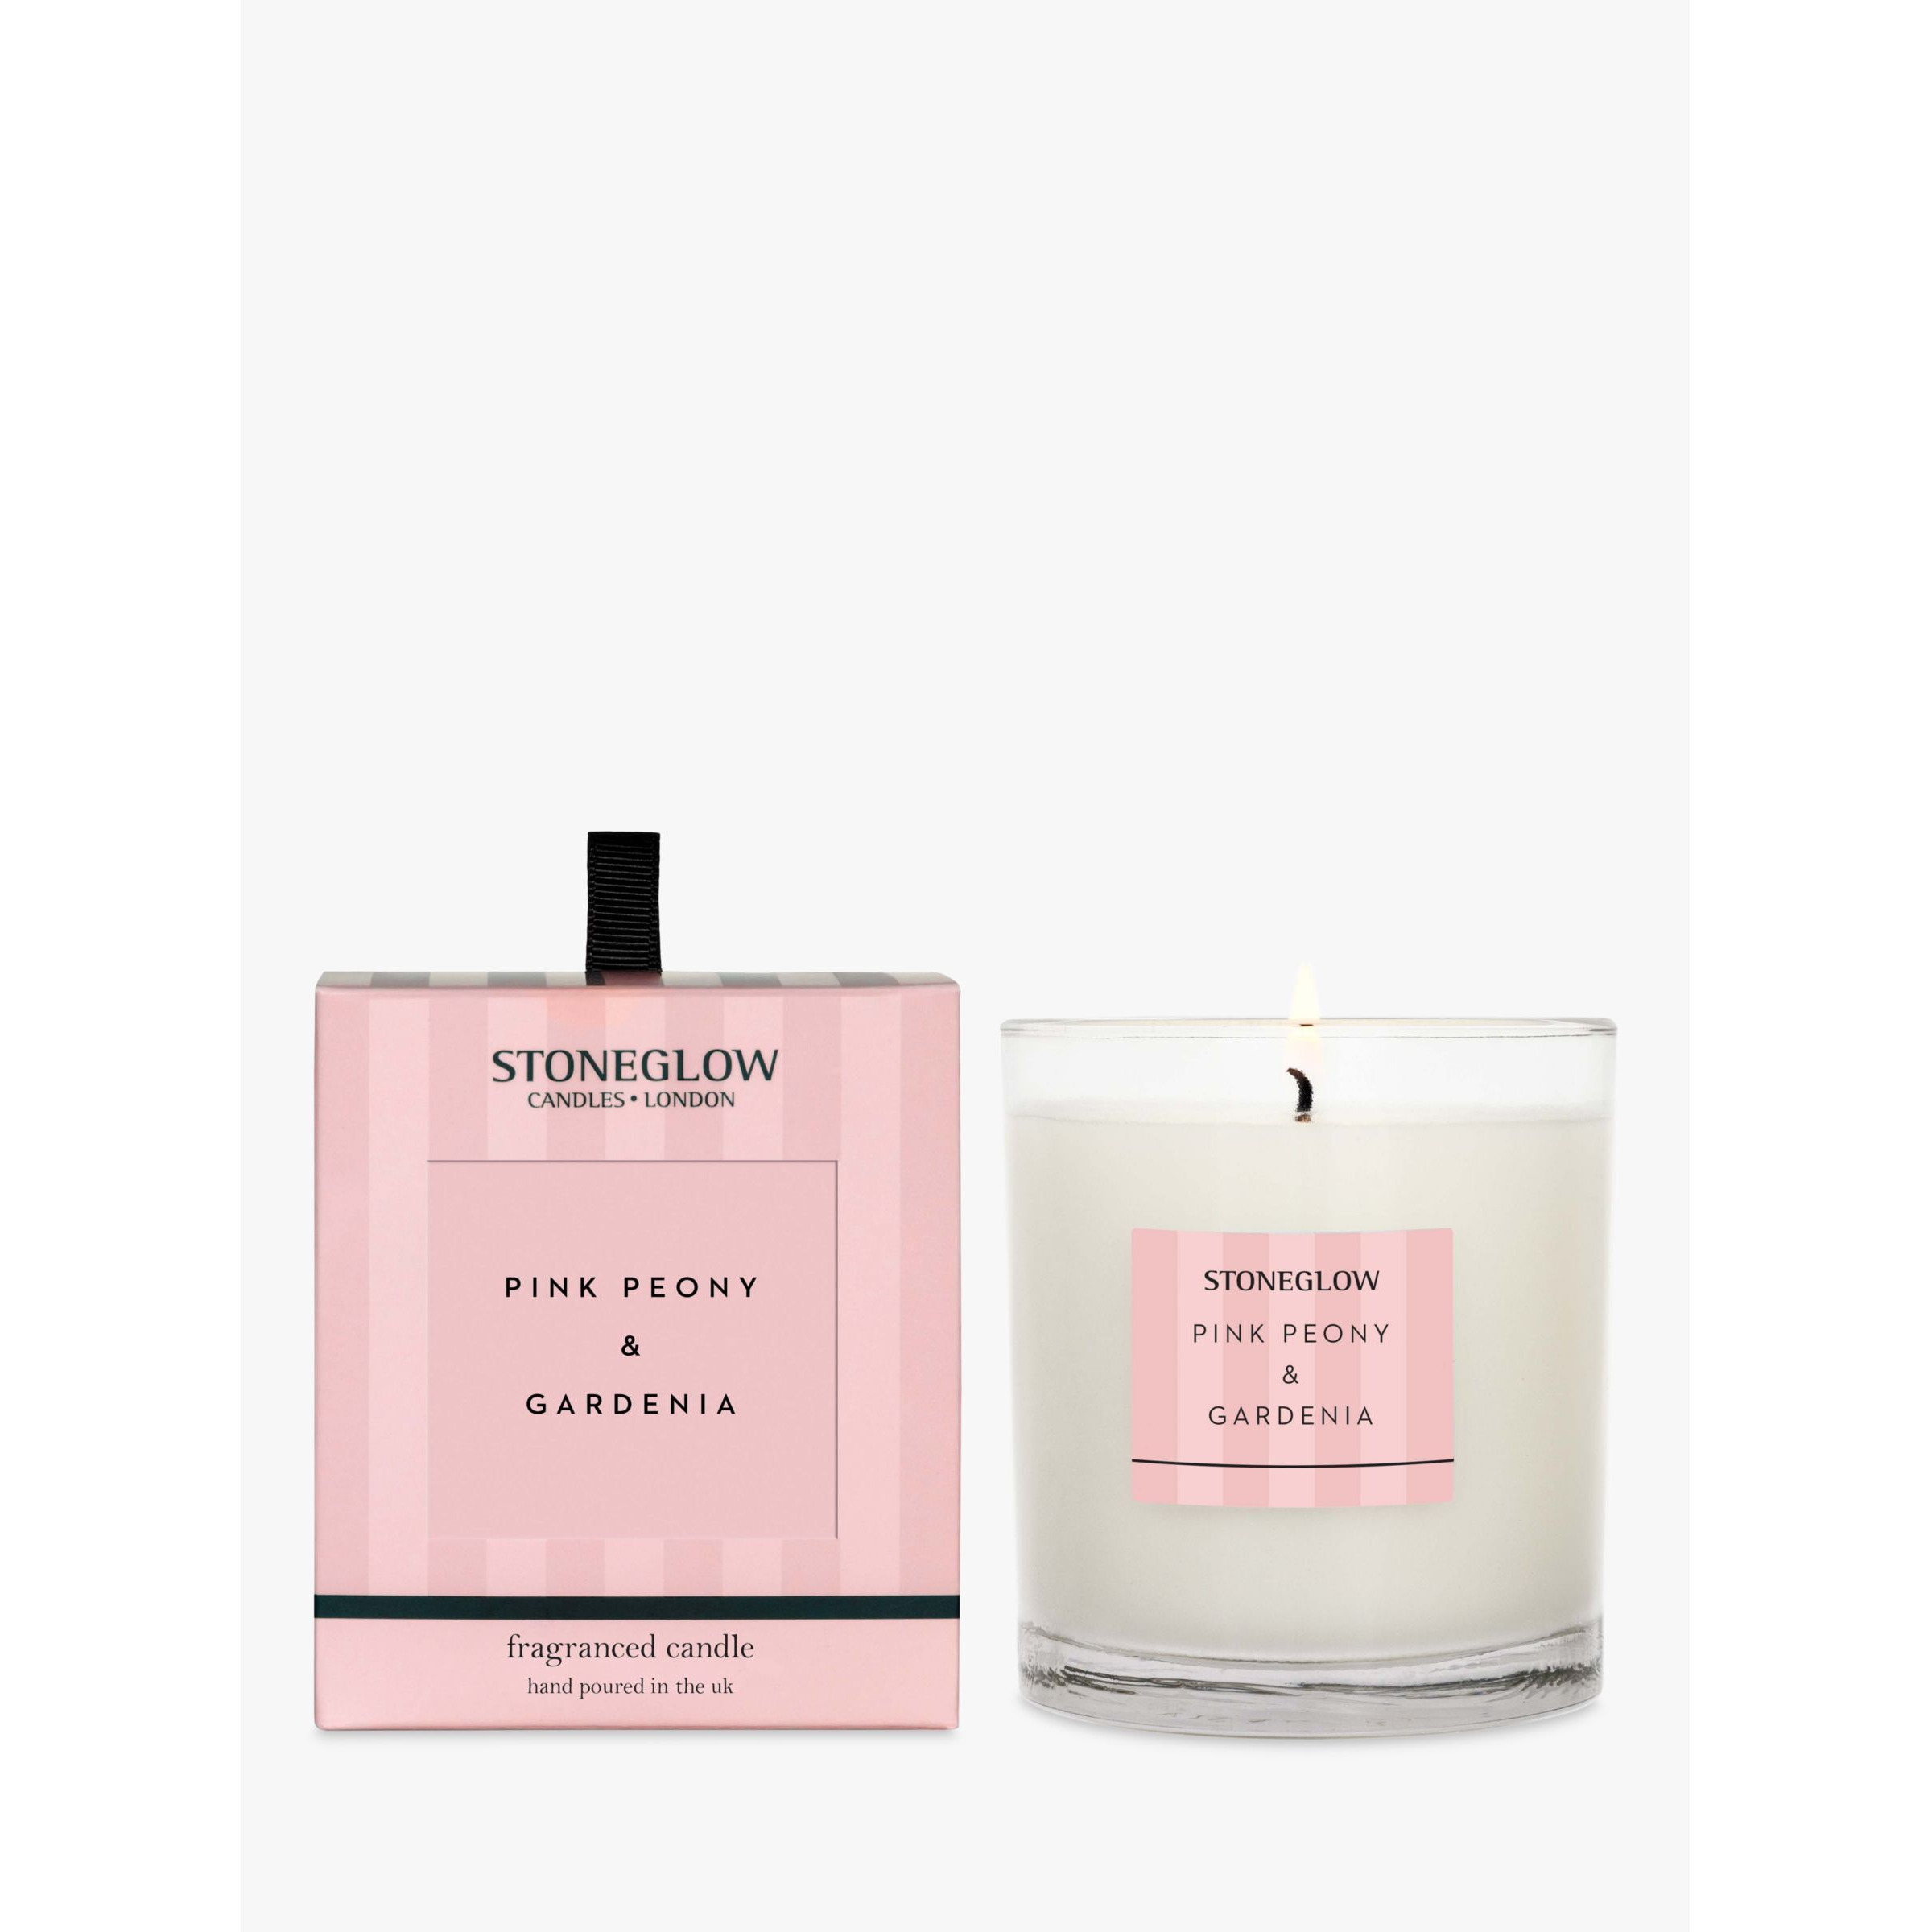 Stoneglow Modern Classic Pink Peony & Gardenia Scented Candle, 200g - image 1